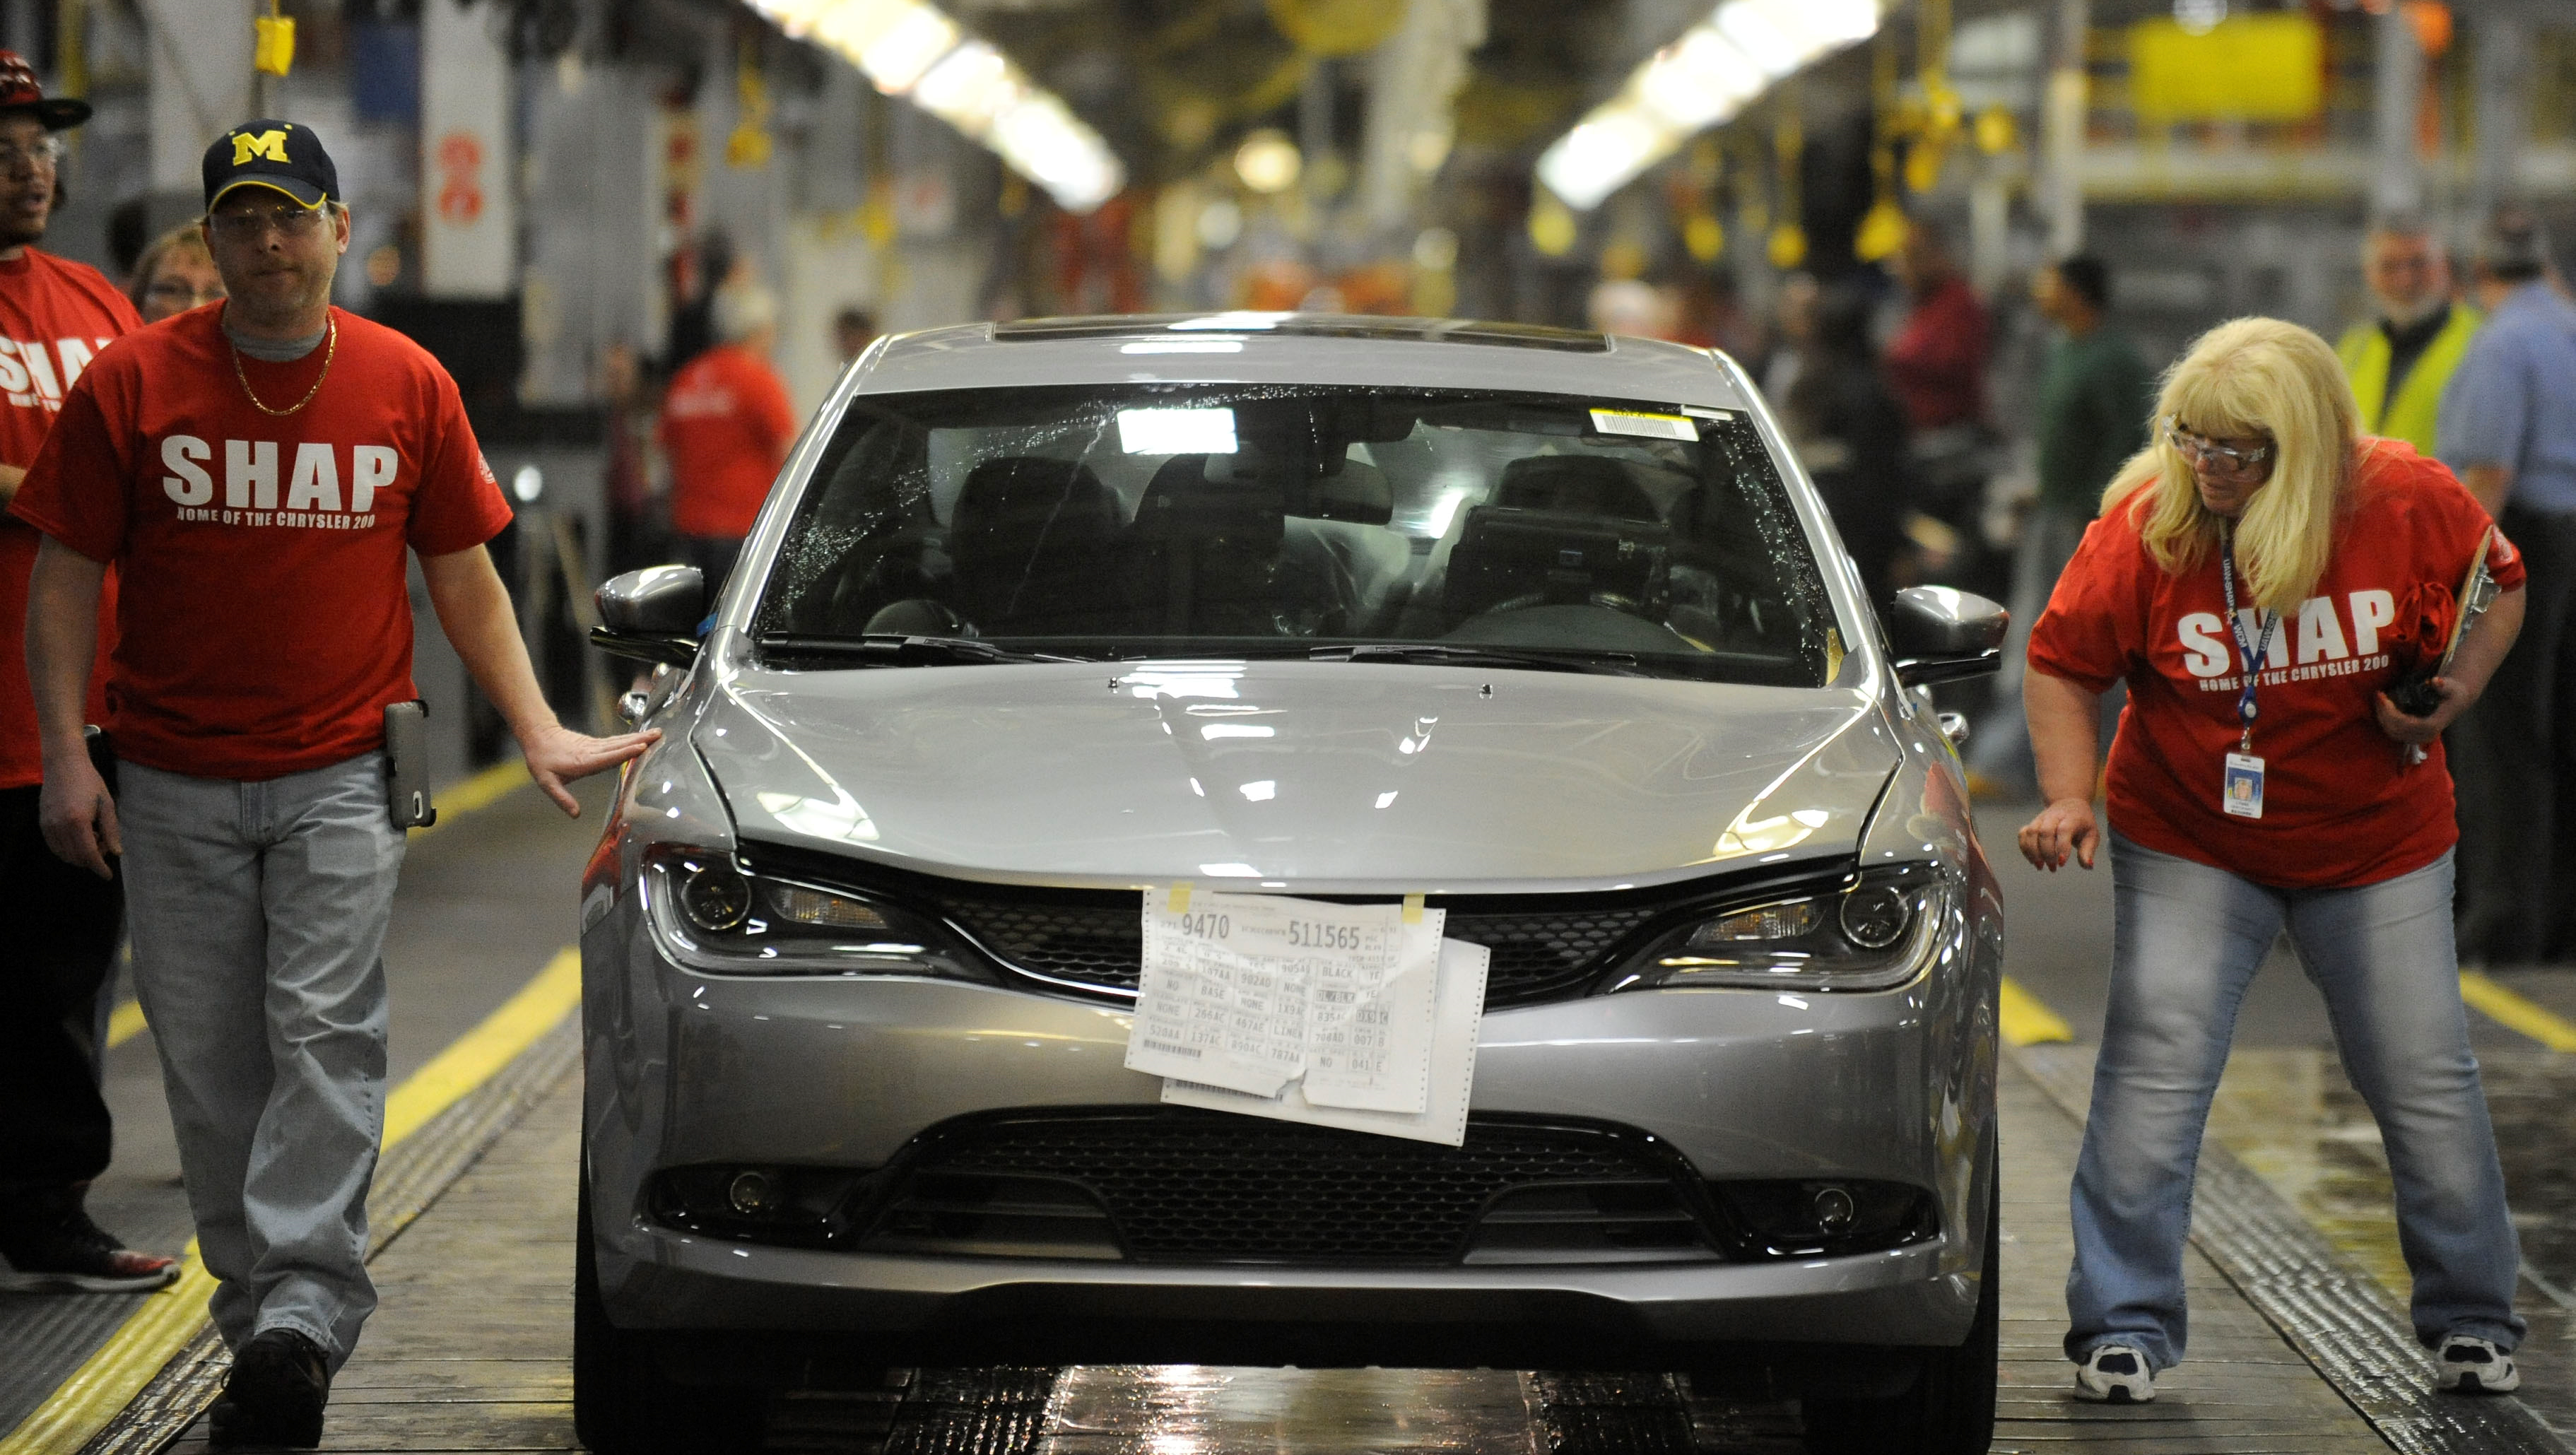 A 2015 Chrysler 200 comes off the assembly line at the Chrysler Sterling Heights Assembly Plant on March 14, 2014.